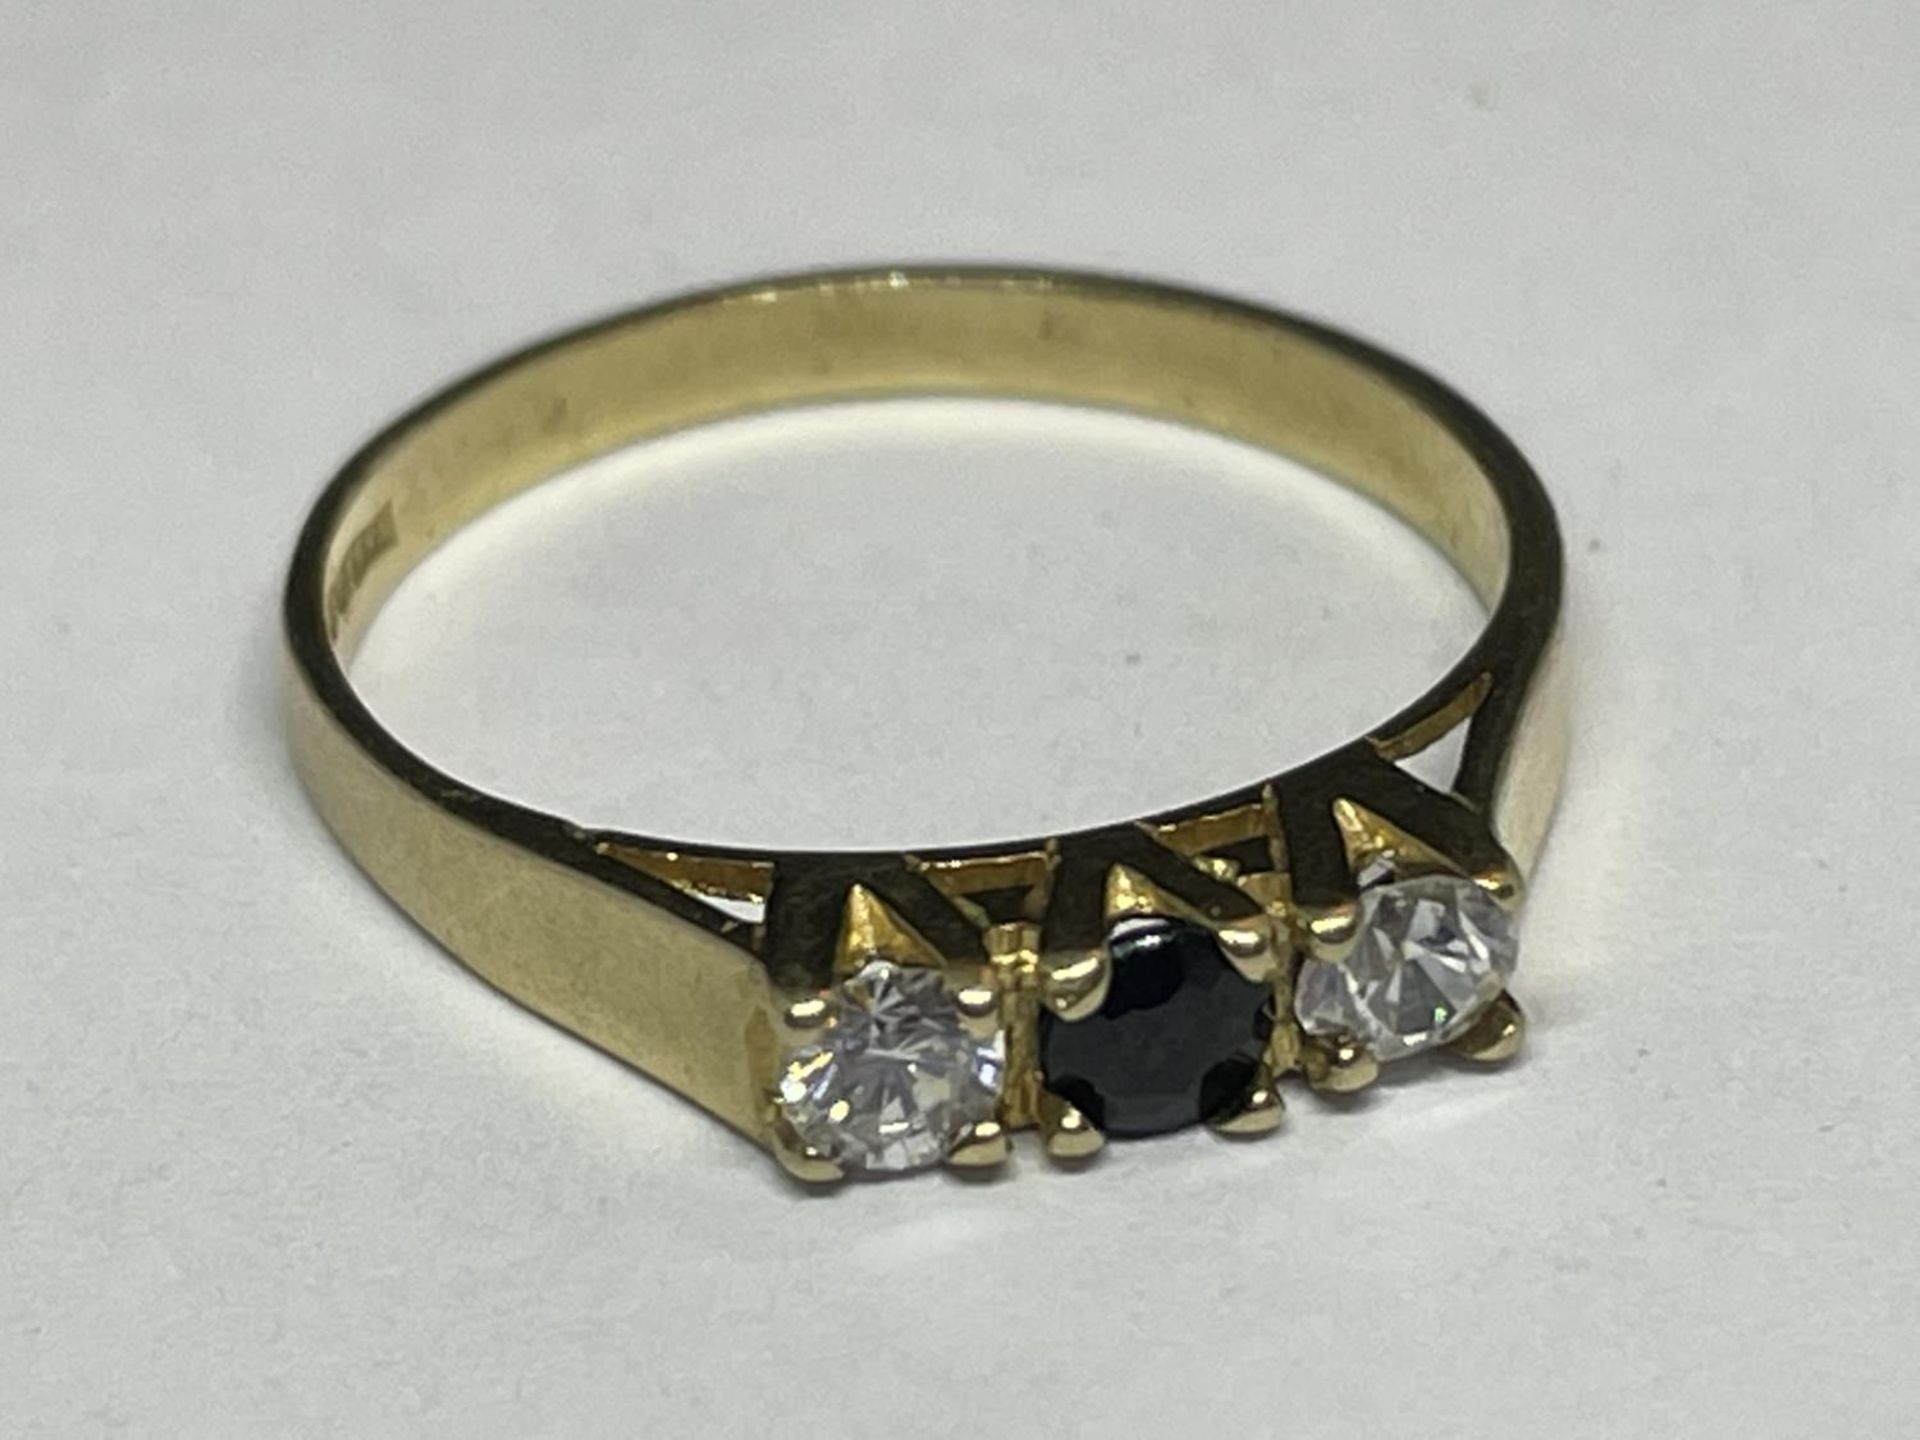 A 9 CARAT GOLD RING WITH THREE IN LINE STONES TO INCLUDE A CENTRE SAPPHIRE AND TWO CUBIC ZIRCONIAS